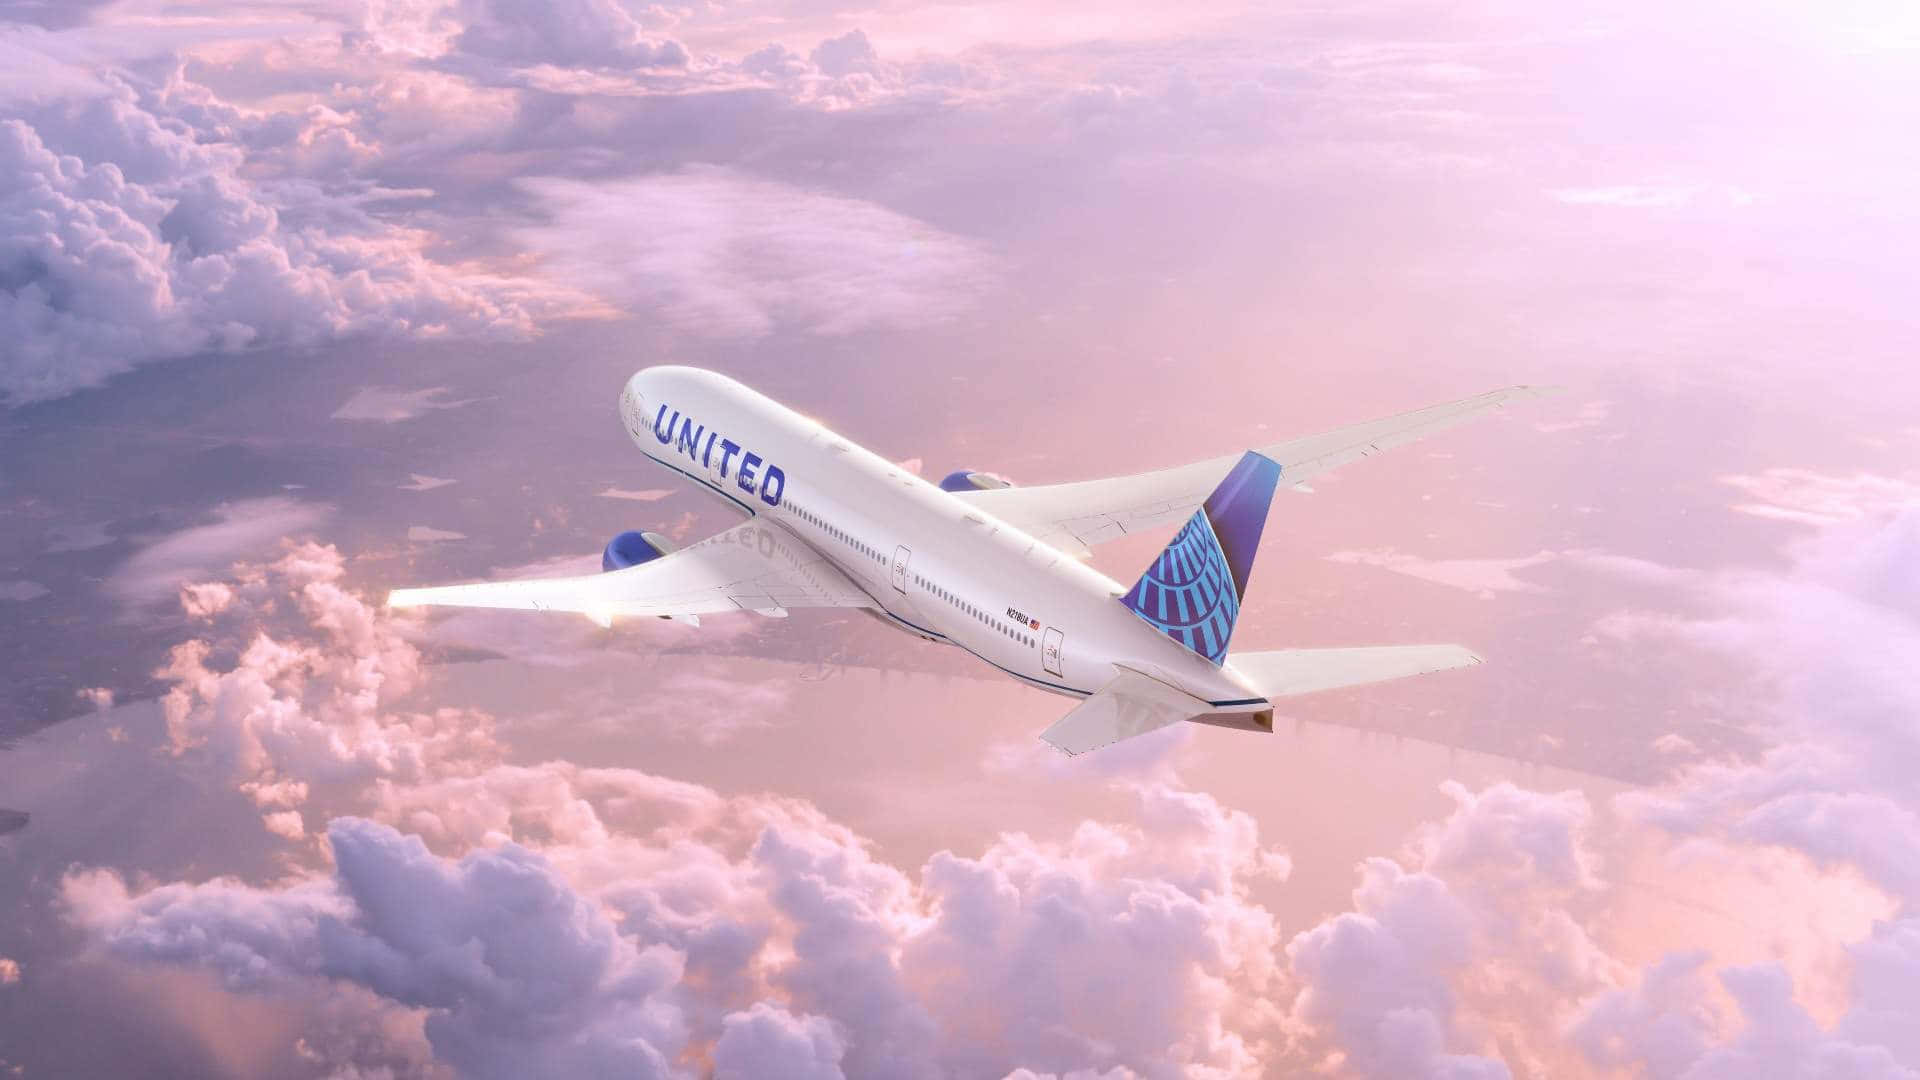 United Airlines - A Jet Flying Through The Clouds Wallpaper